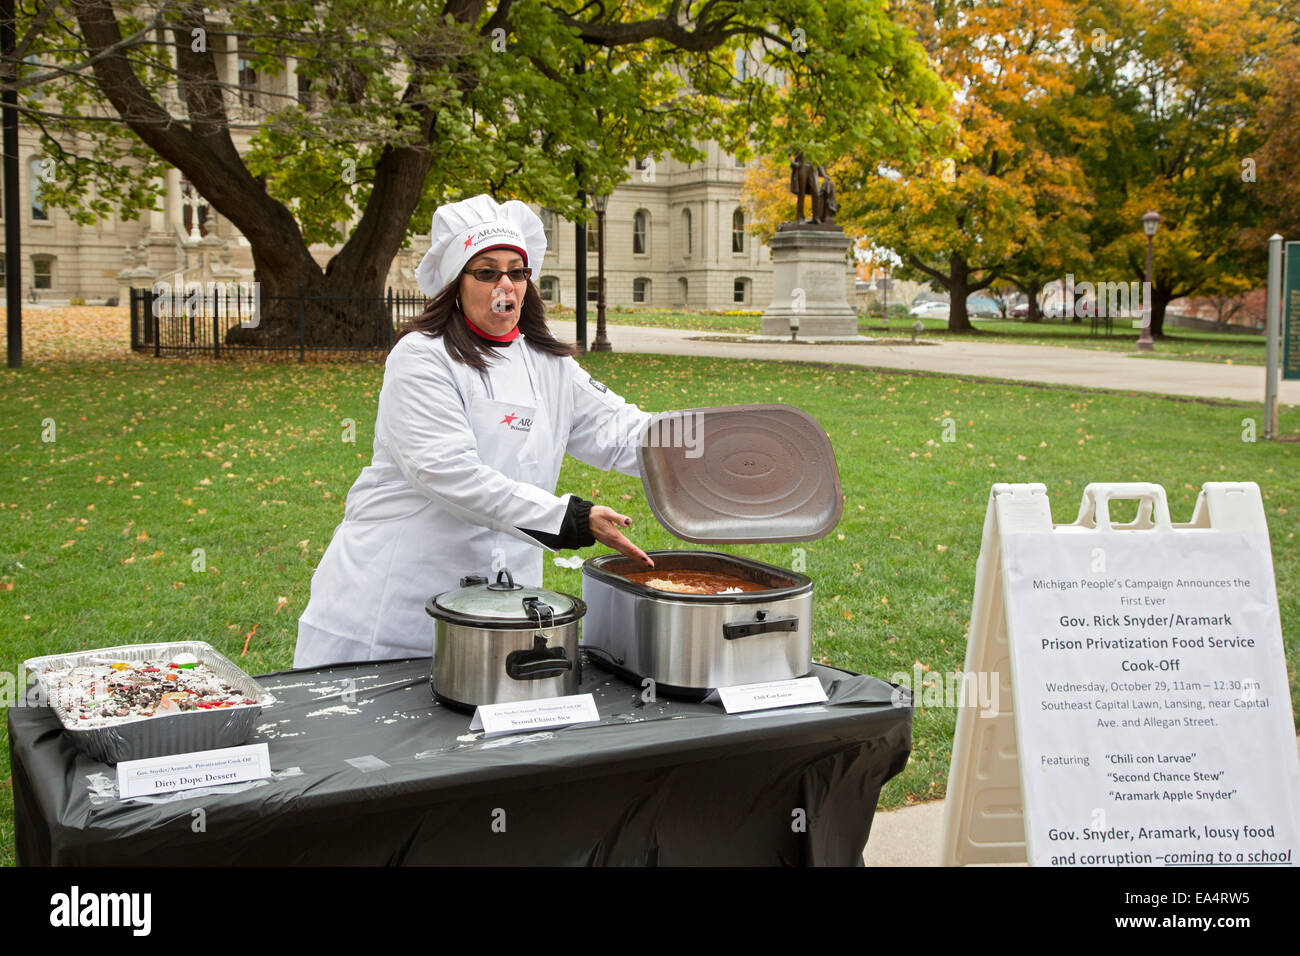 Lansing, Michigan - The Michigan People's Campaign held a 'Prison Privatization Food Service Cook-Off' at the state capitol. Stock Photo